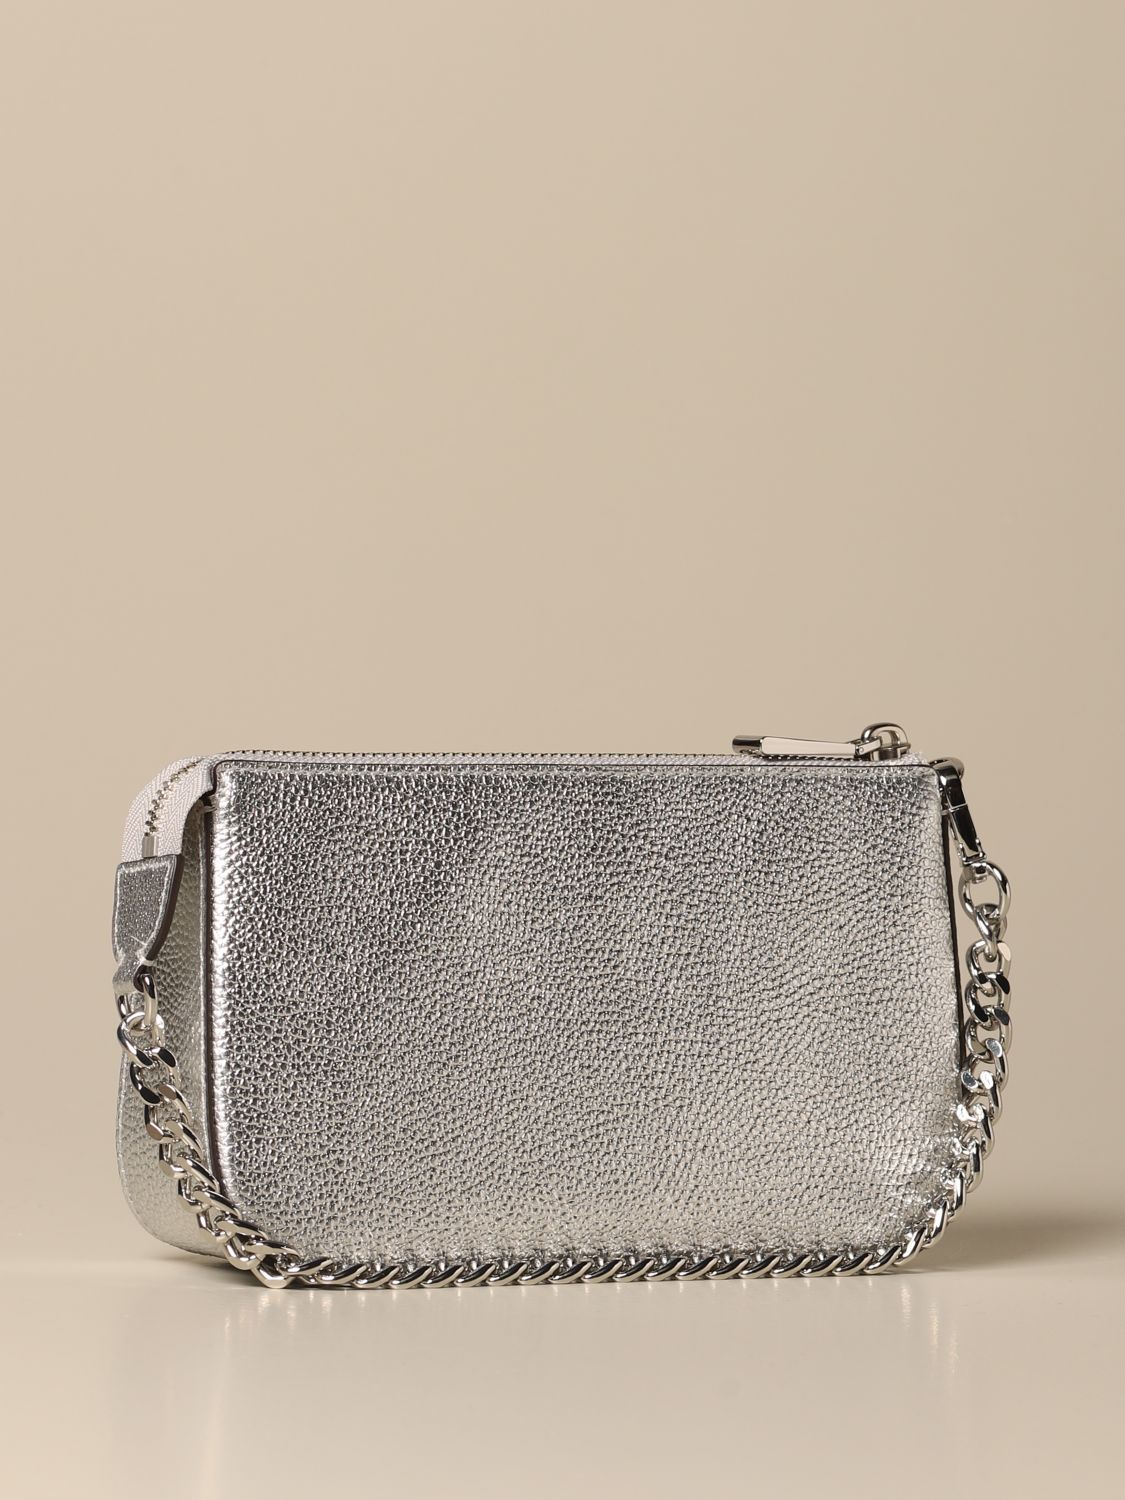 Michael Michael Kors chain clutch in laminated leather